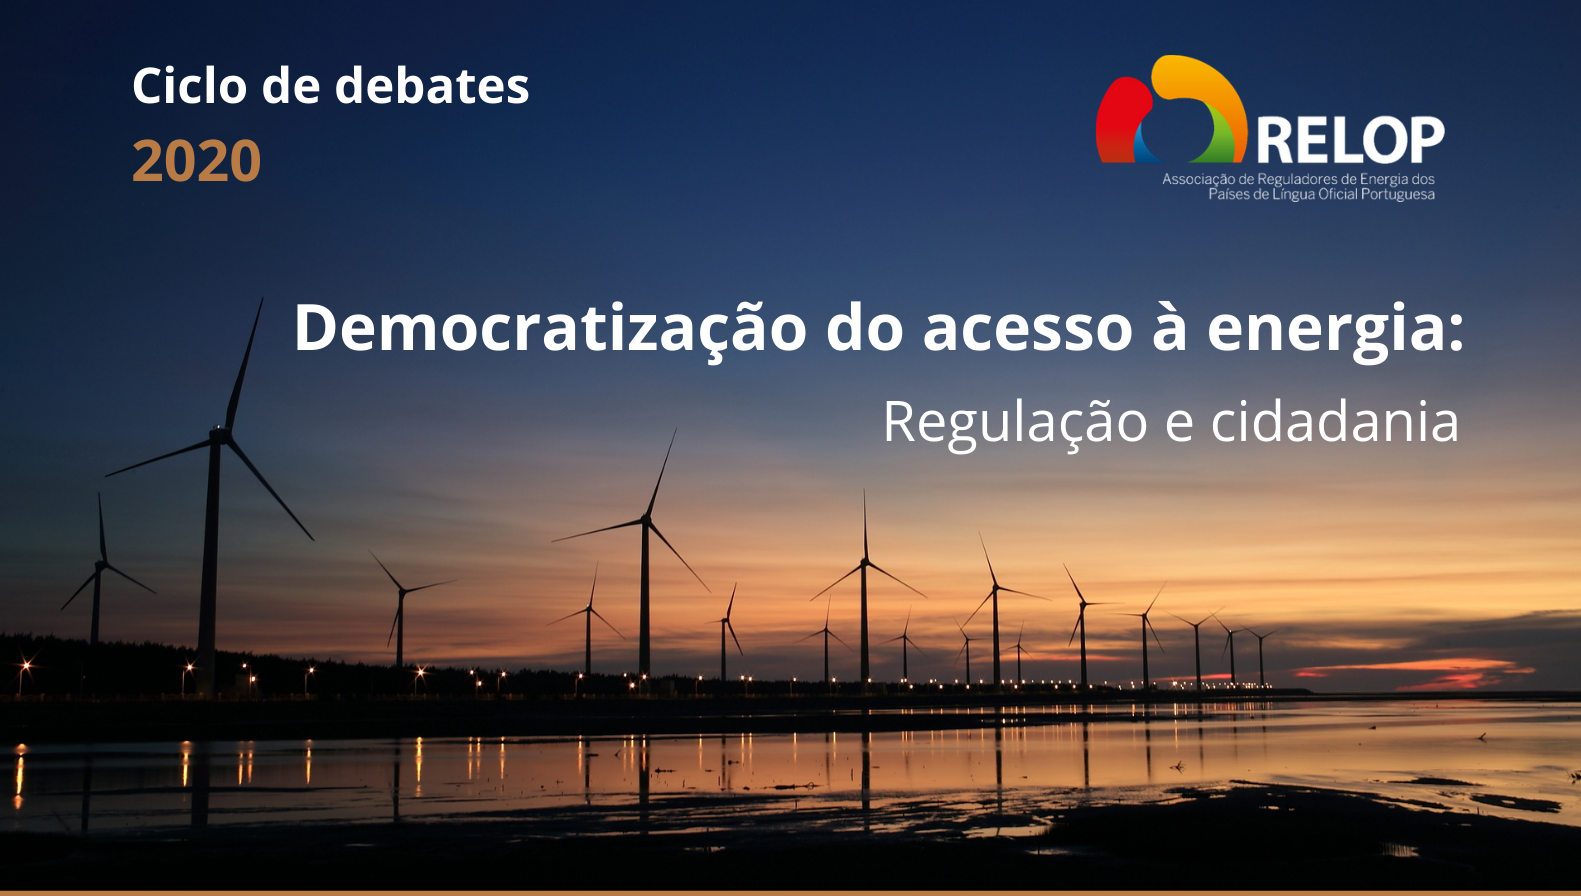 Session III: Innovation in the Electricity Sector for the Democratization of Access to Energy and Consumer Protection